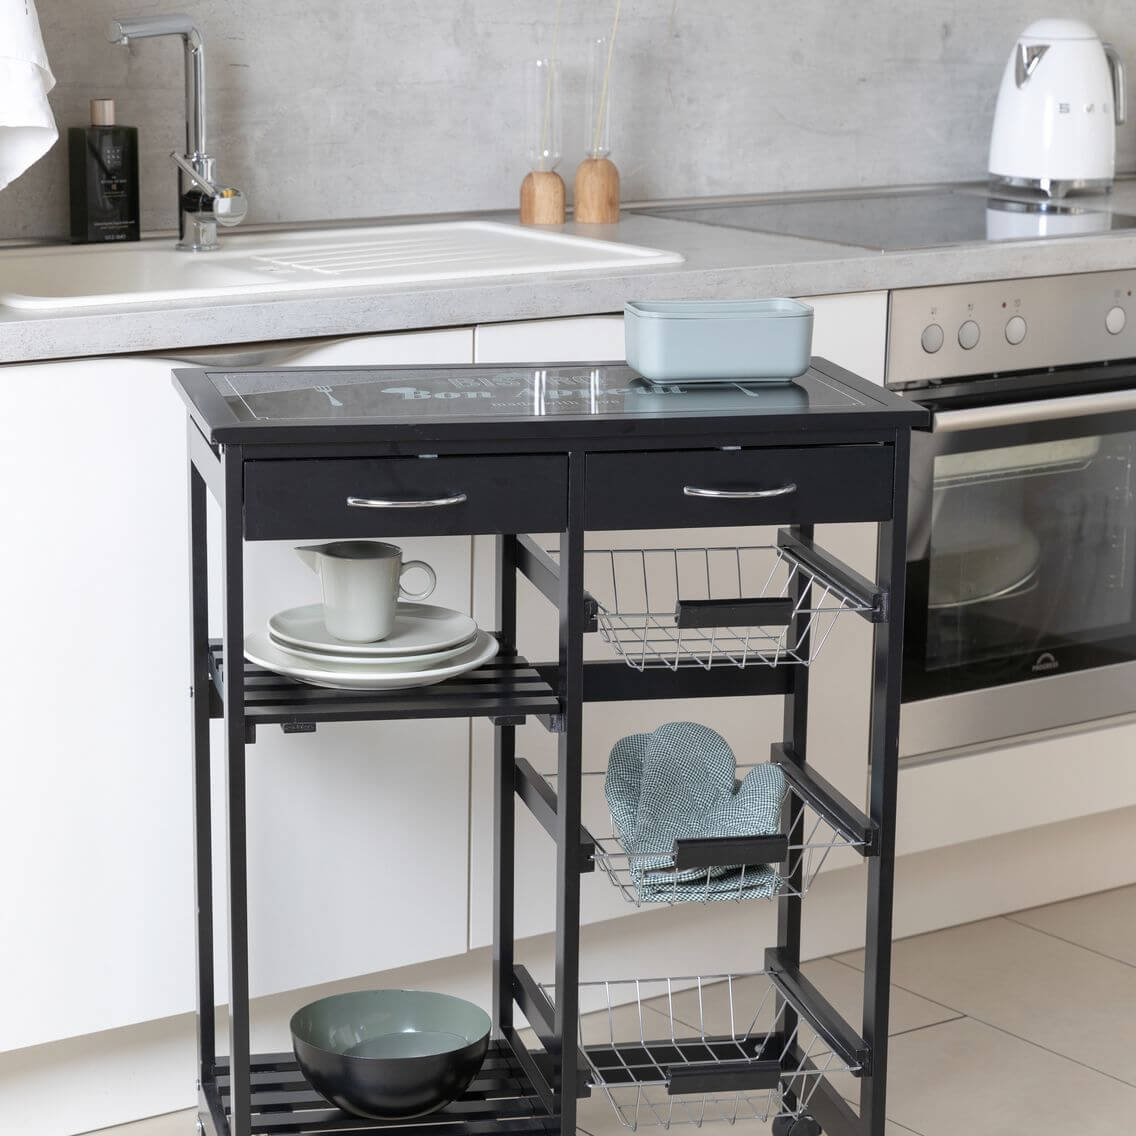 A black kitchen storage trolley standing in front of a kitchen cupboard